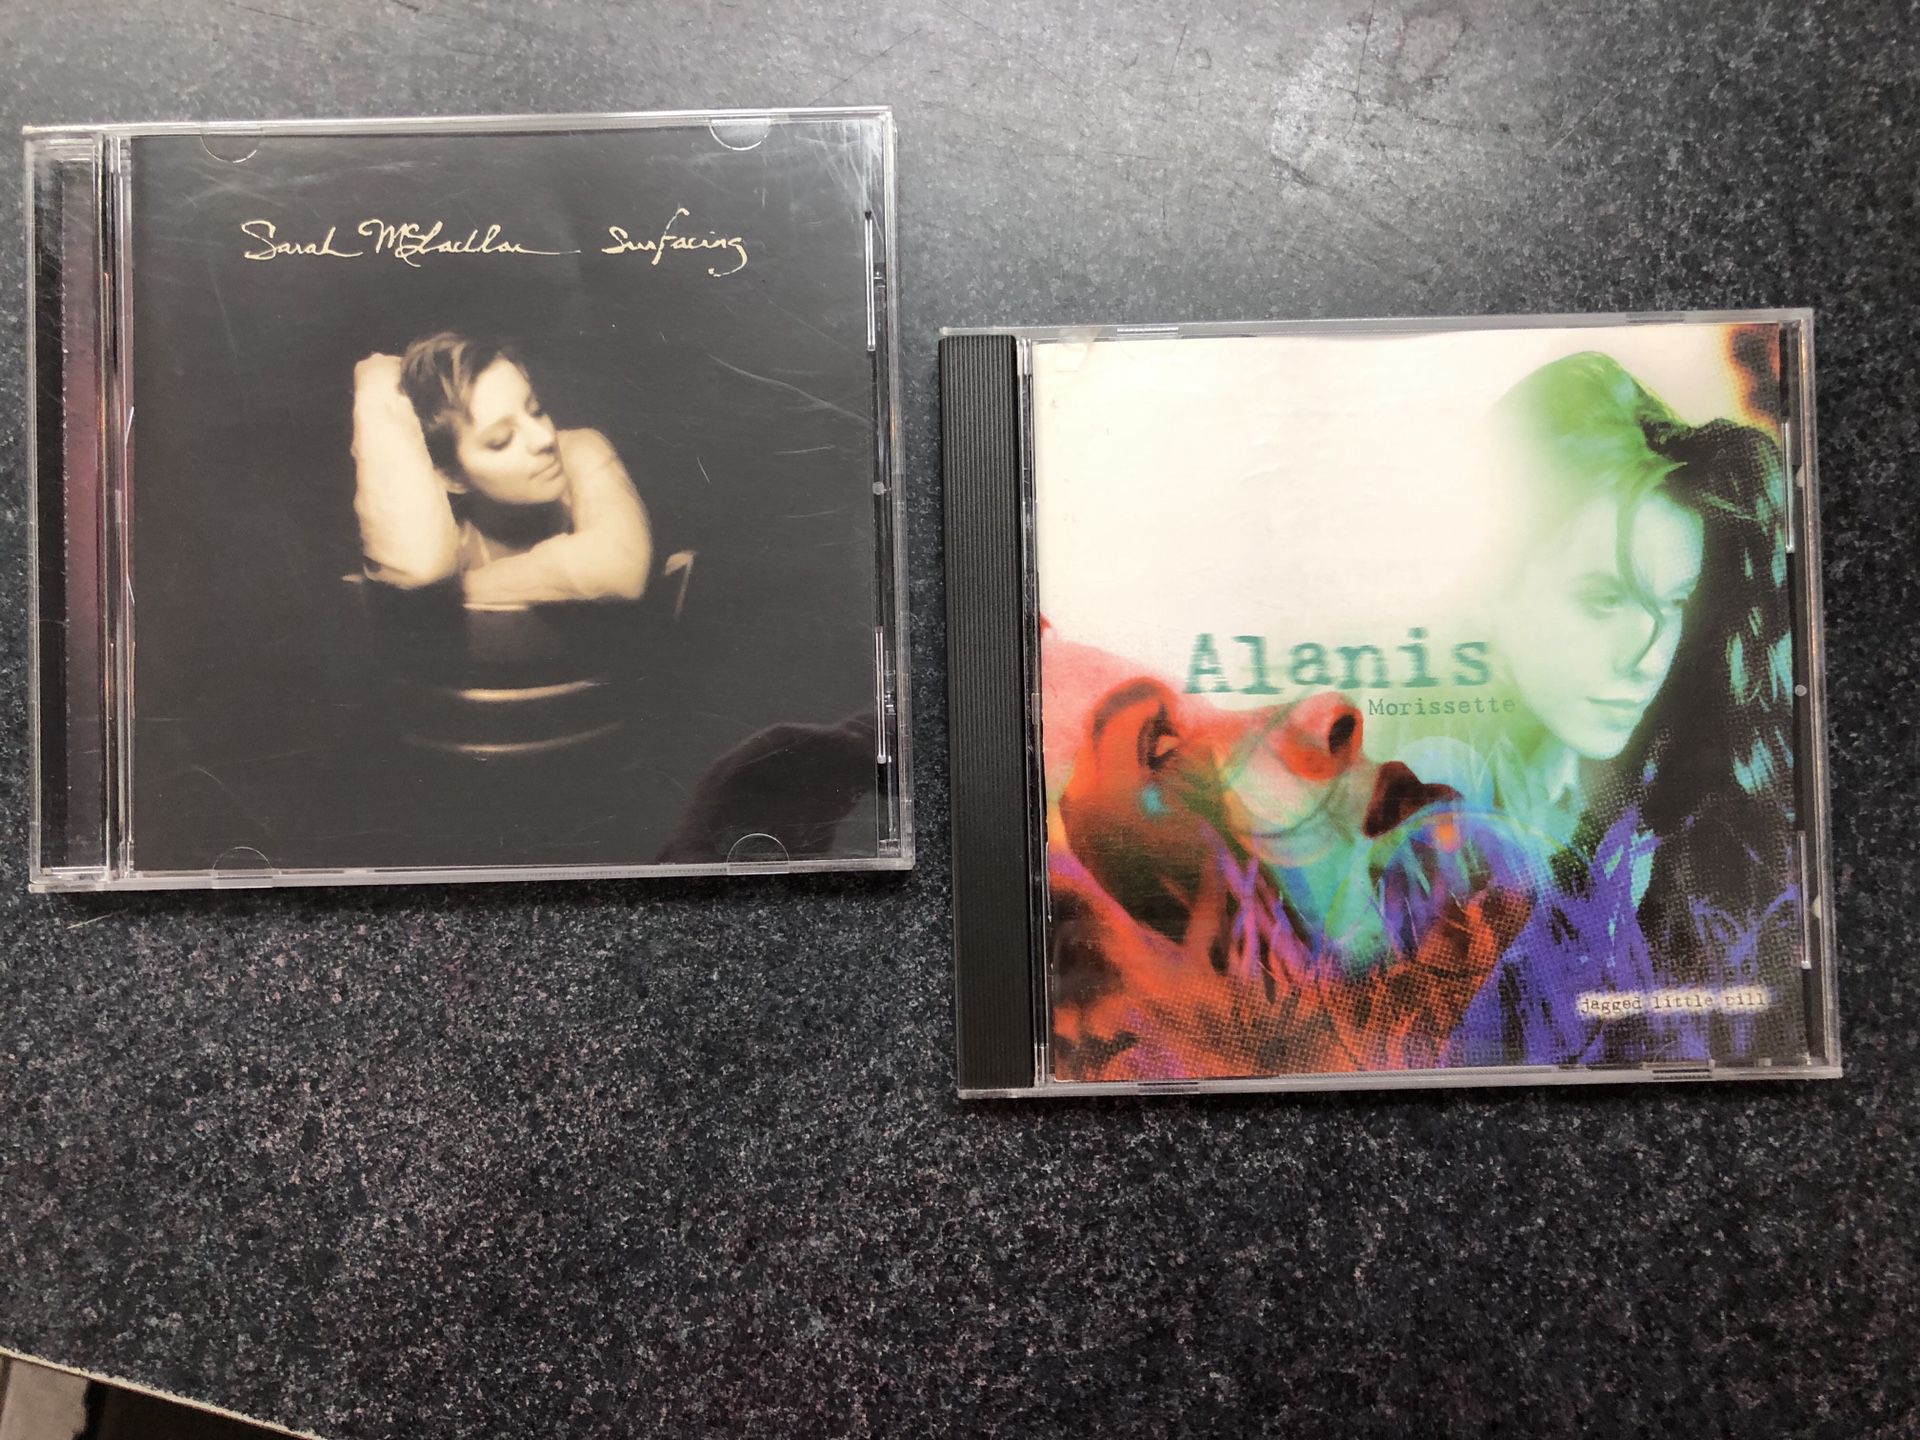 Alanis Morissette and Sarah McLachlan CDS as pictured